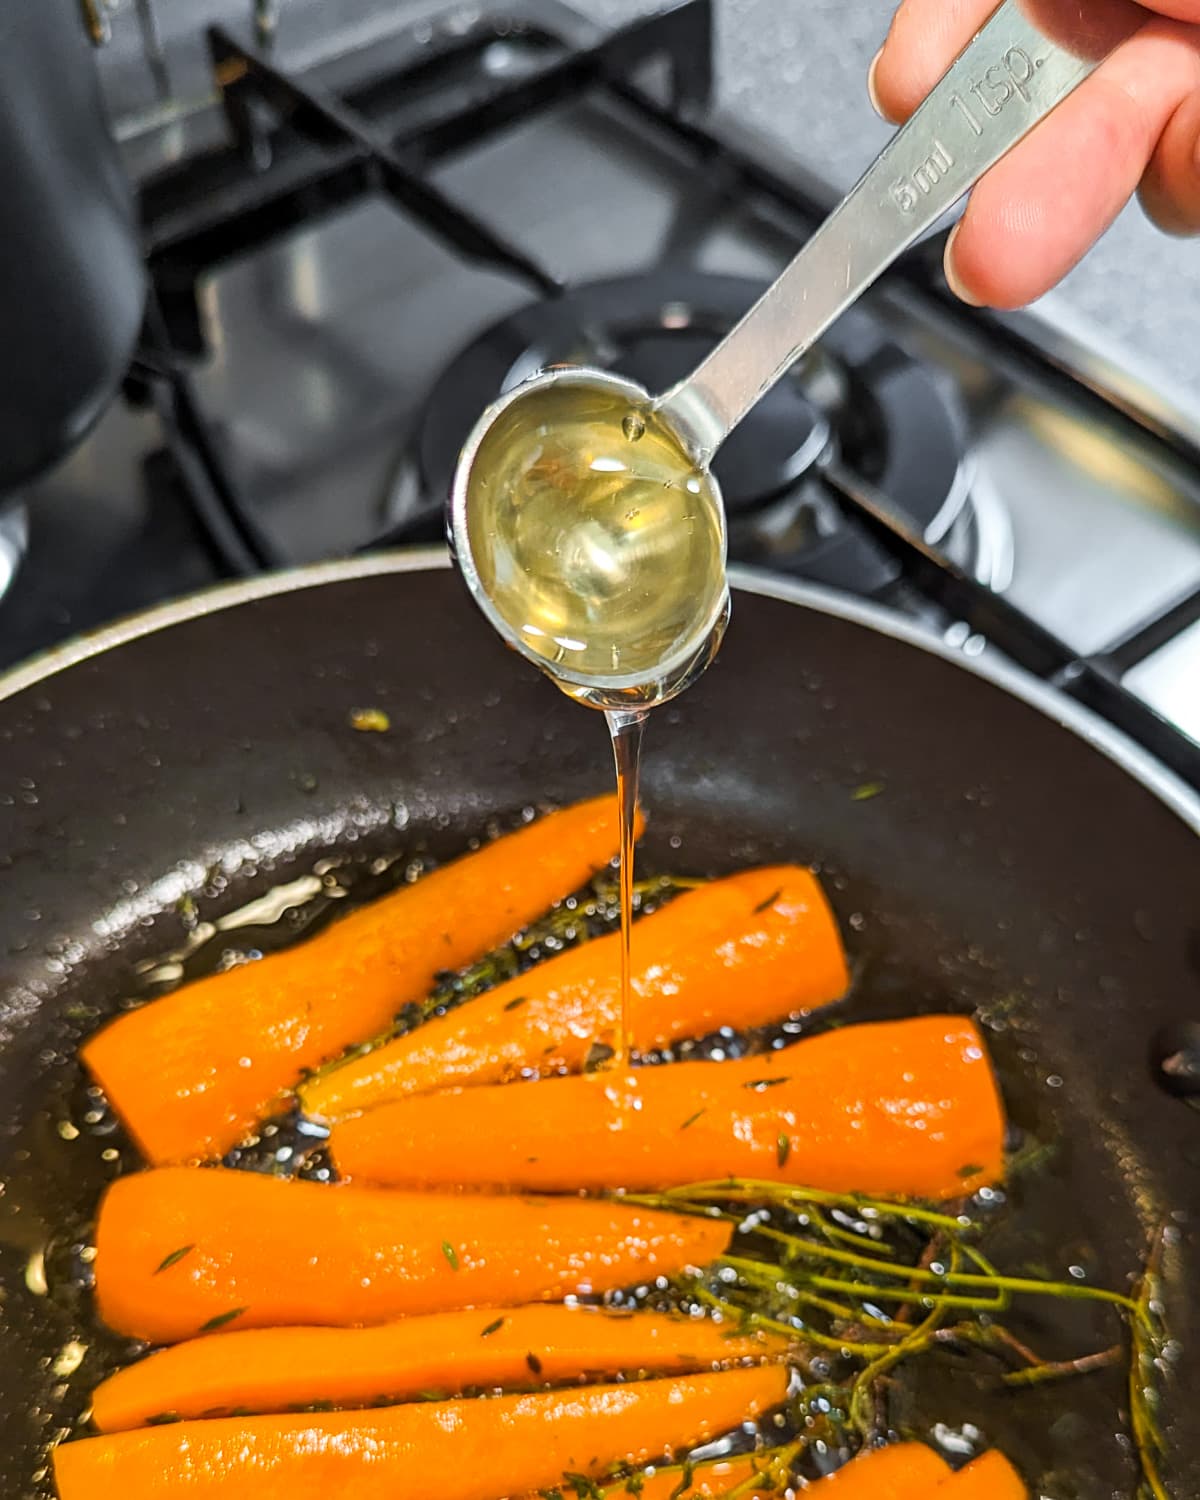 A woman hand holding a teaspoon with honey over fried carrots in a frying pan.